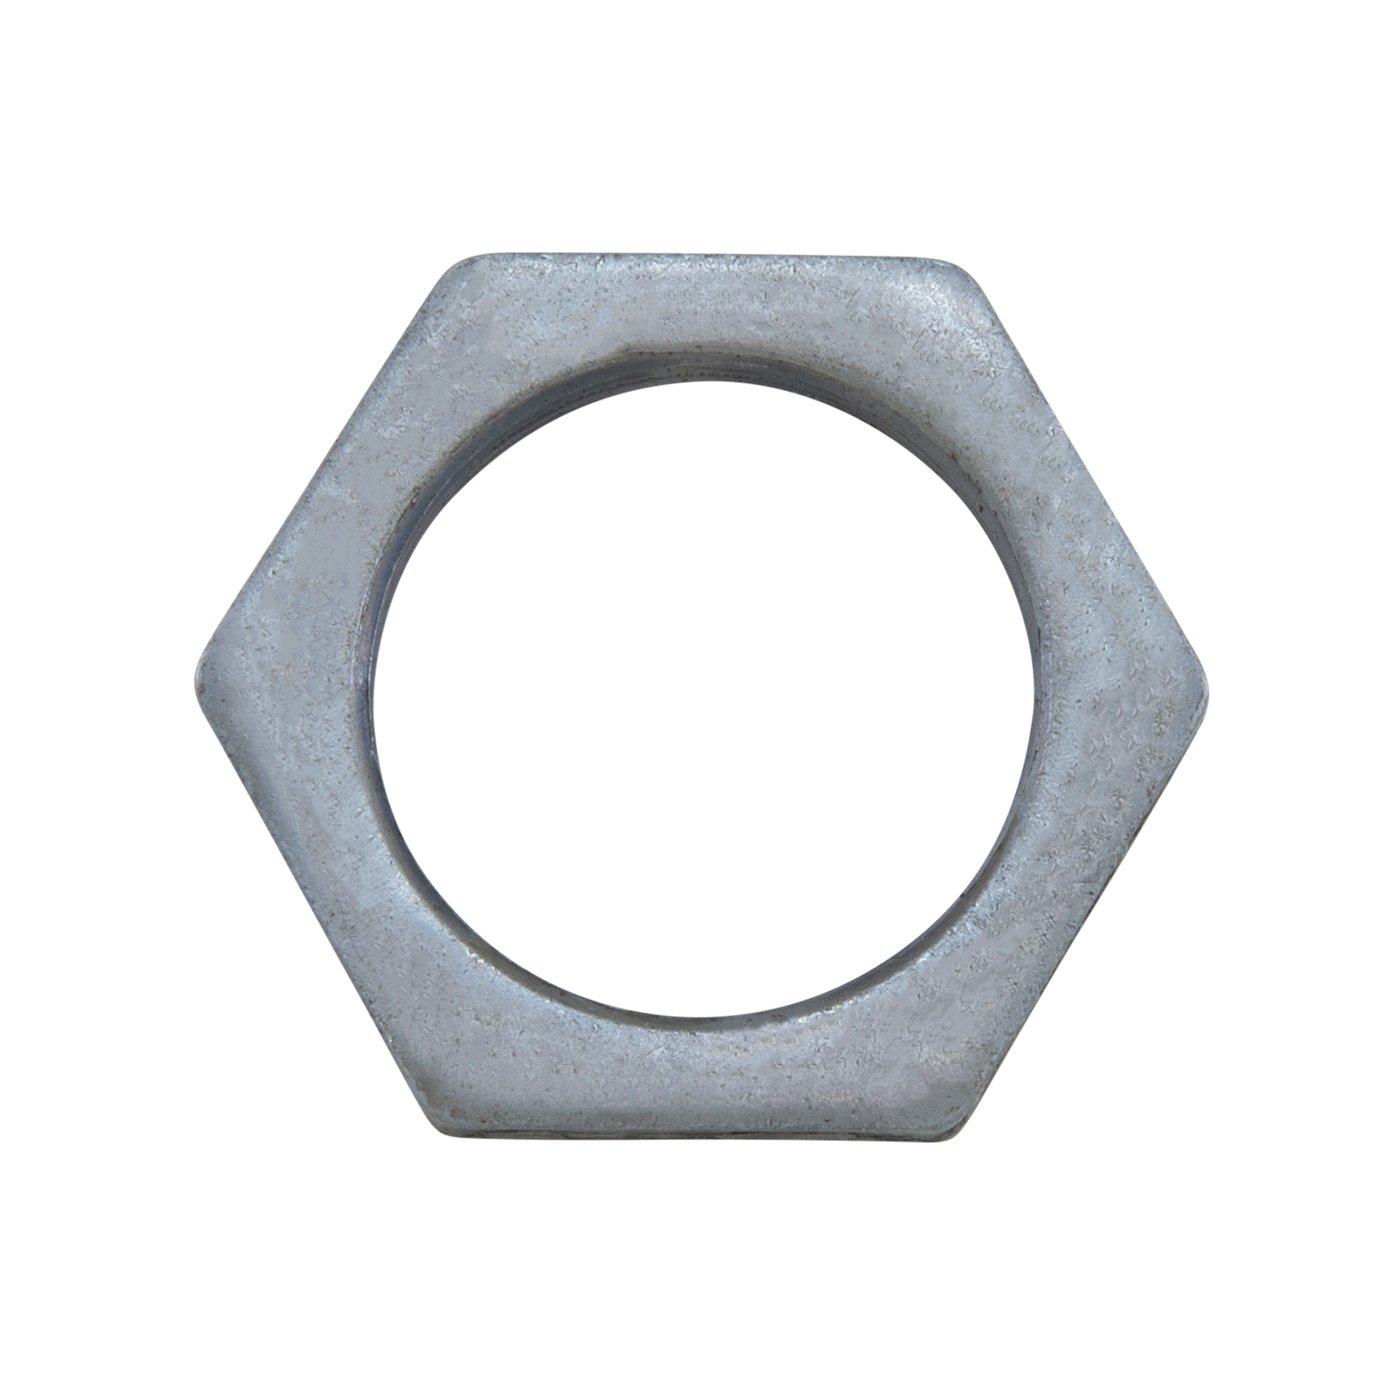 Spindle Nut For Dana 60, 1.750 in. I.D., 6 Sided